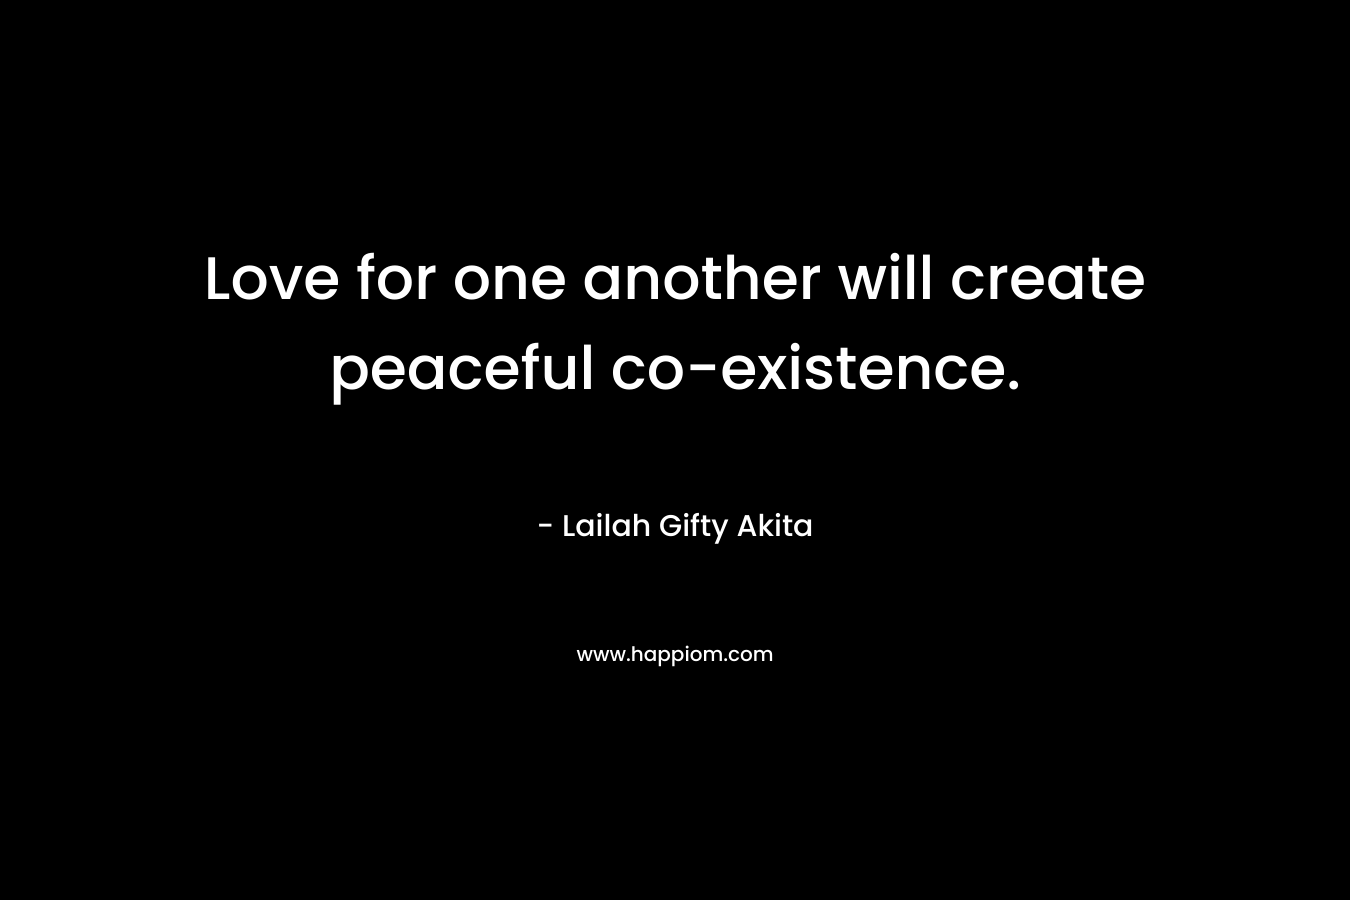 Love for one another will create peaceful co-existence.